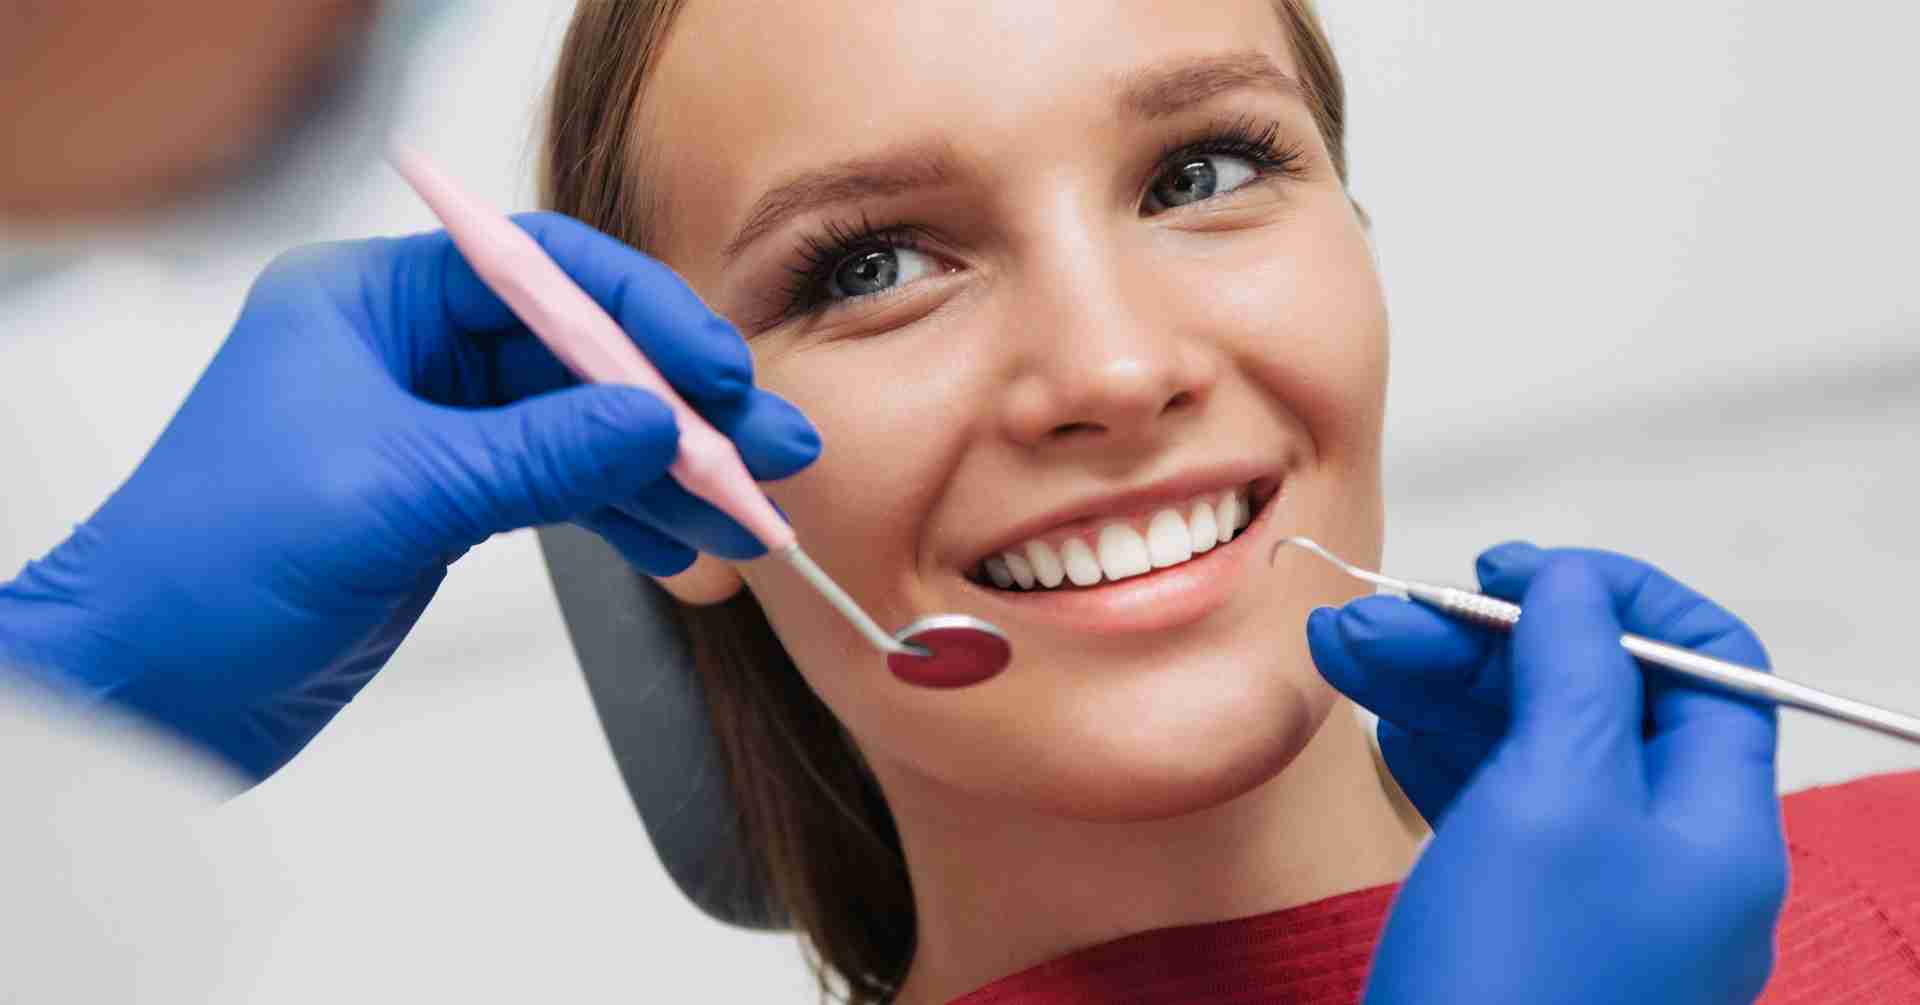 How a dental check-up may save your life